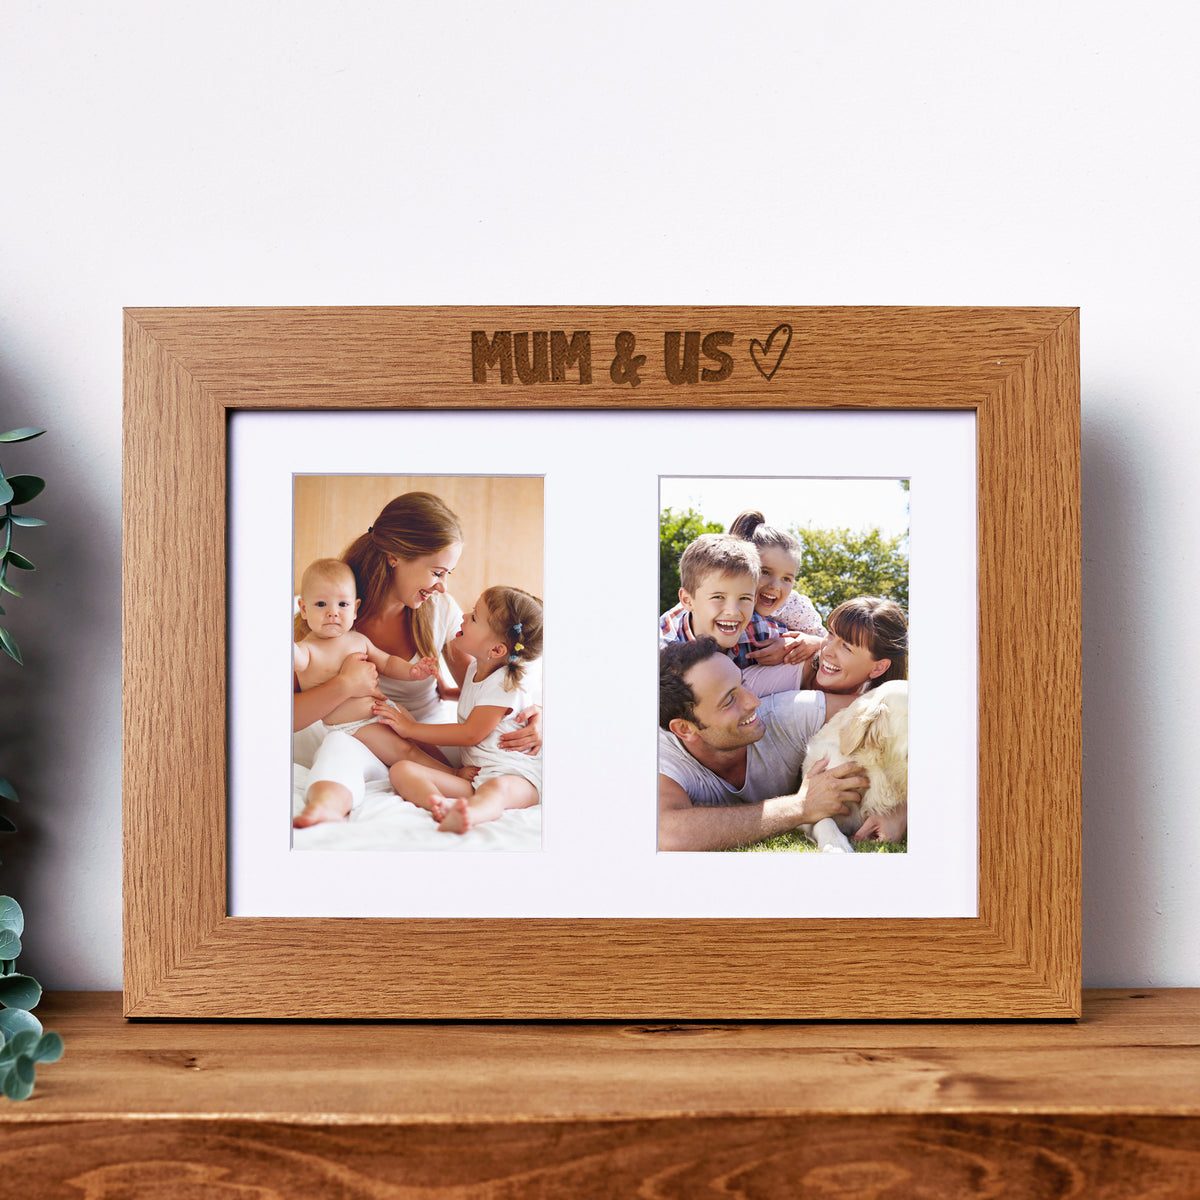 Mum and Us Photo Picture Frame Double 6x4 Inch